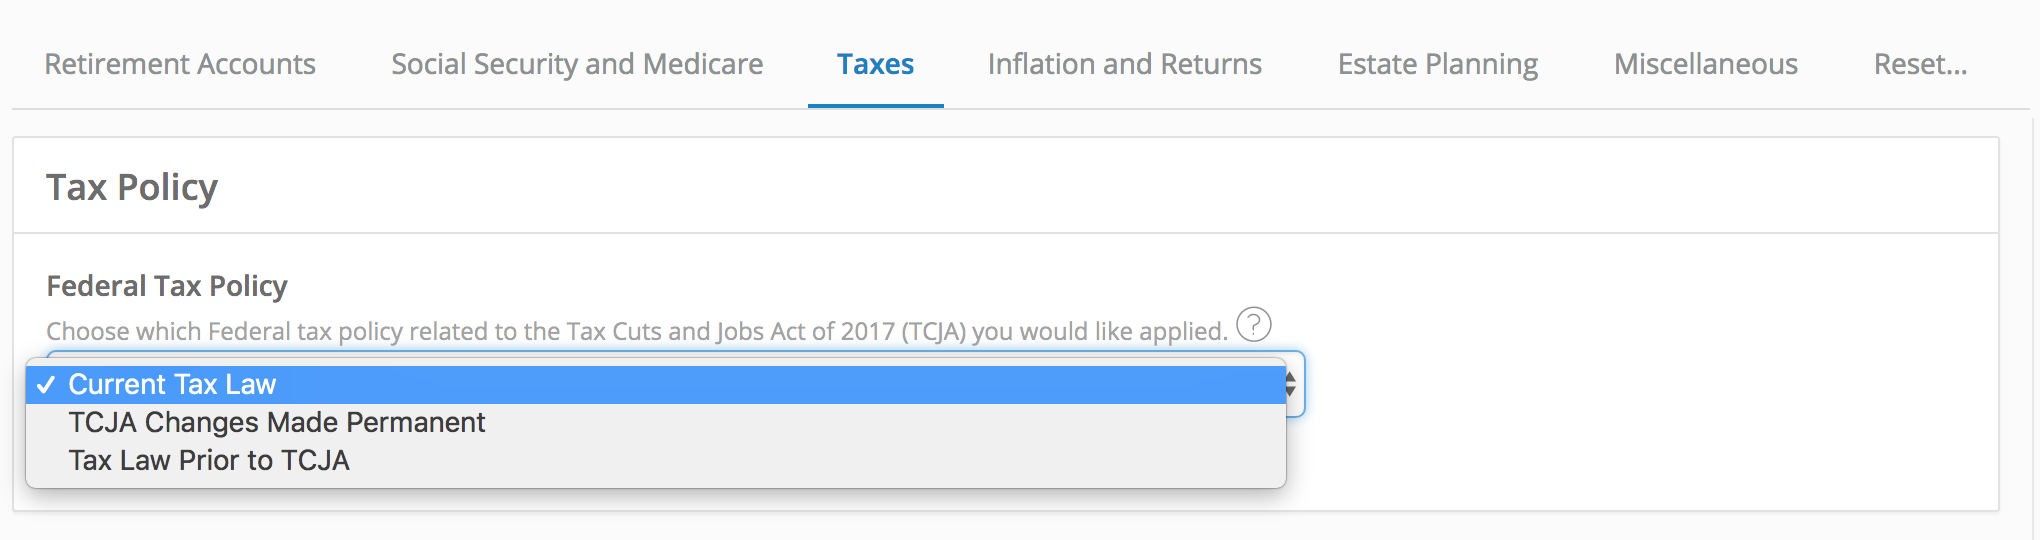 Tax Policy Setting on Settings and Assumptions Taxes Tab